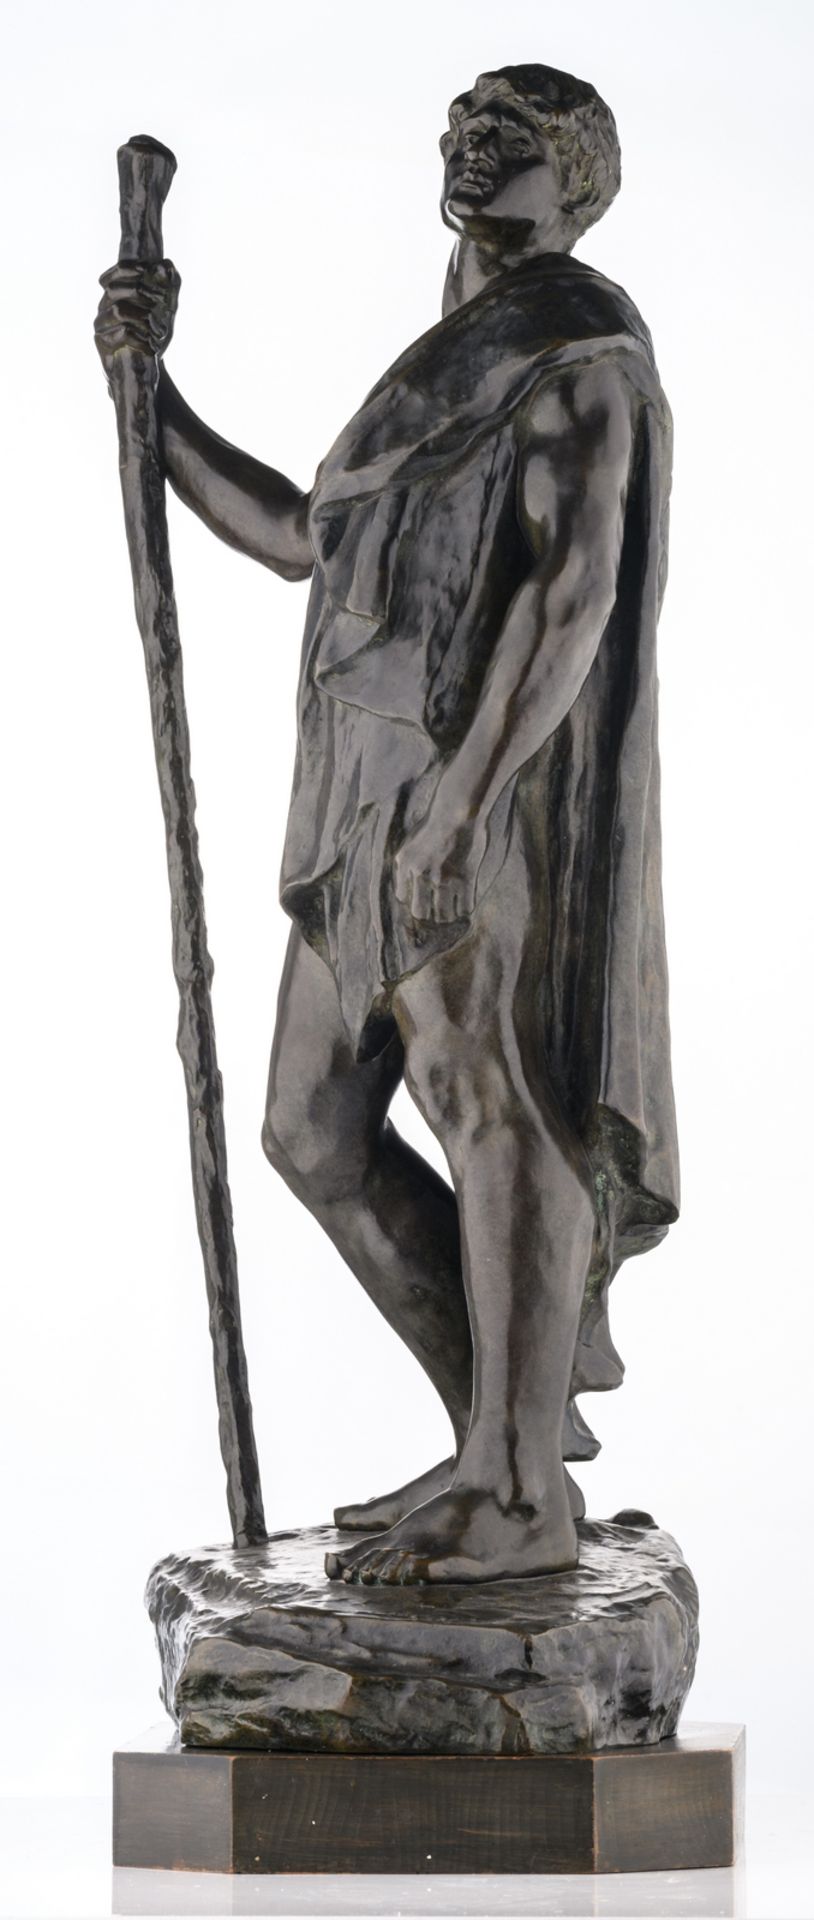 Colin G., 'Le chemin parcouru', patinated bronze, on a wooden base with dedication to Emile - Bild 3 aus 9